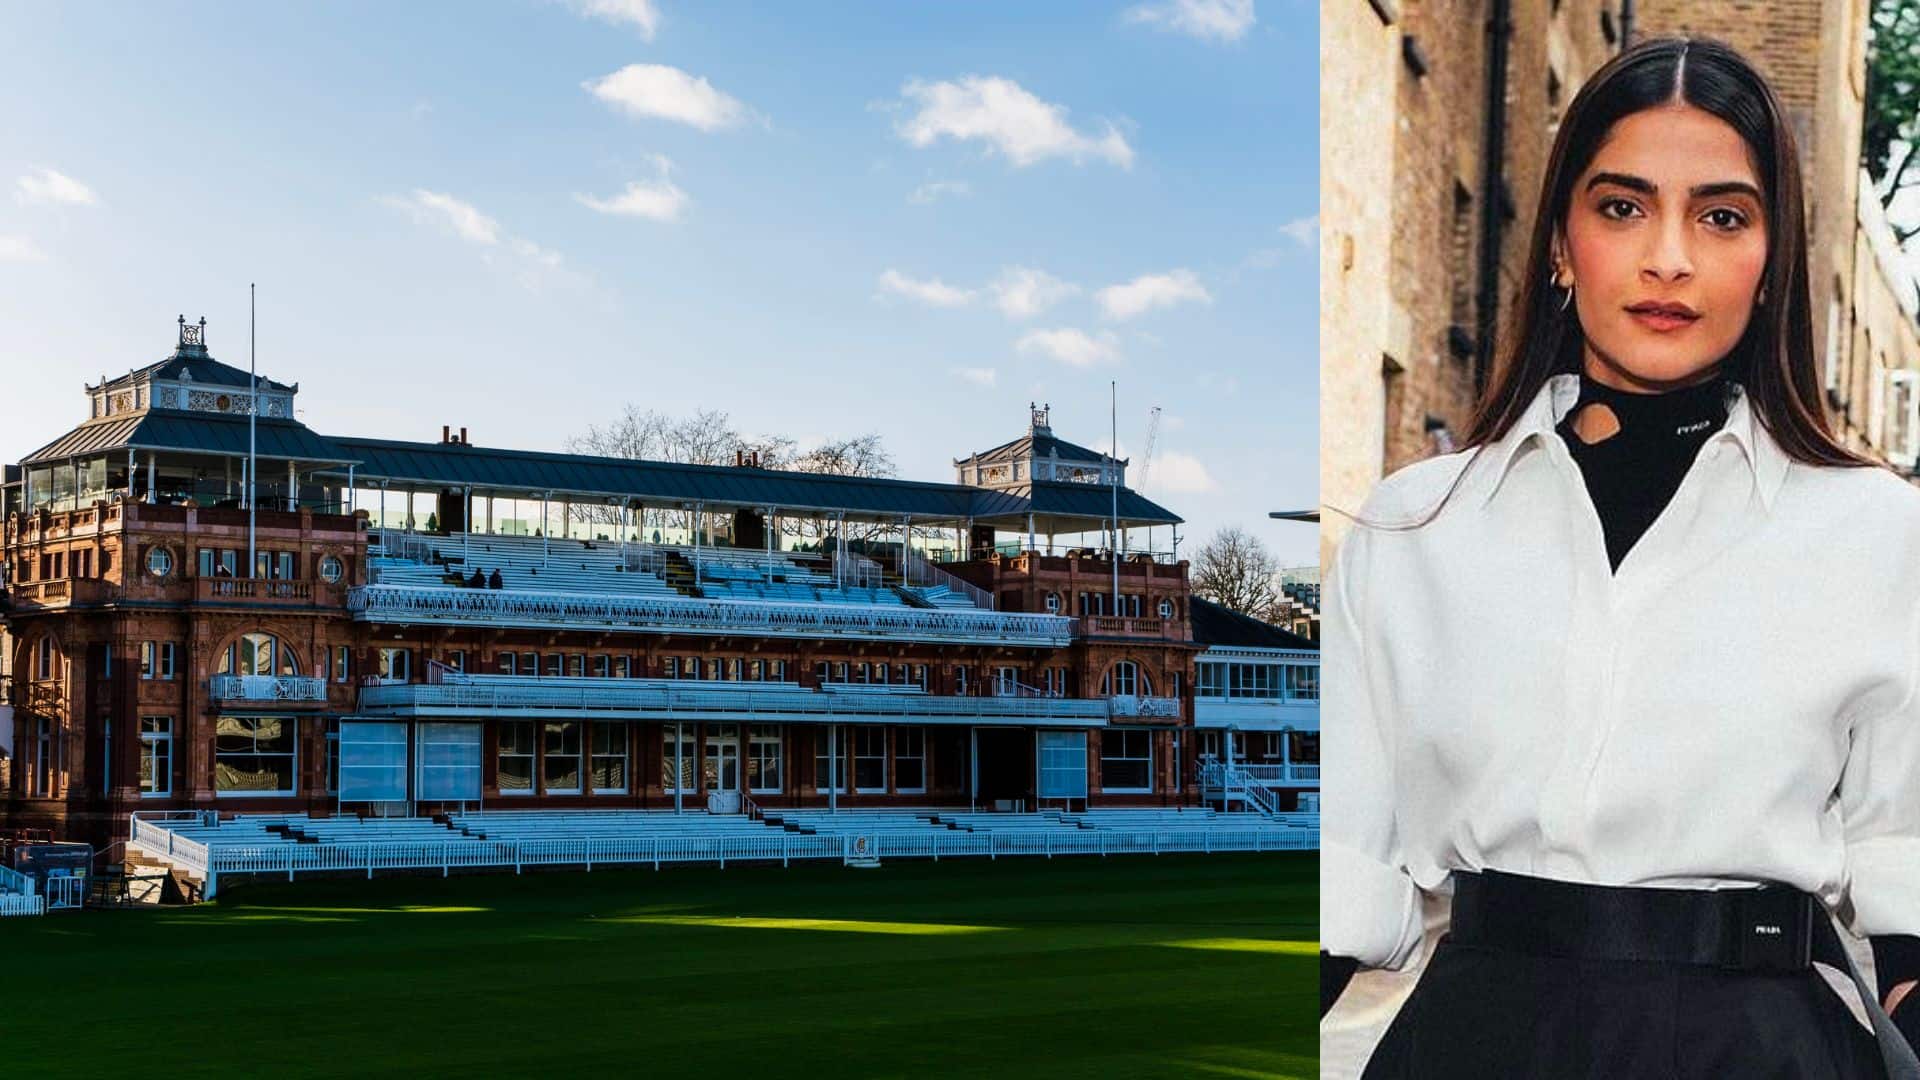 Lord's Stadium Attended by Bollywood Star Sonam Kapoor Ahead of 2nd Ashes Test